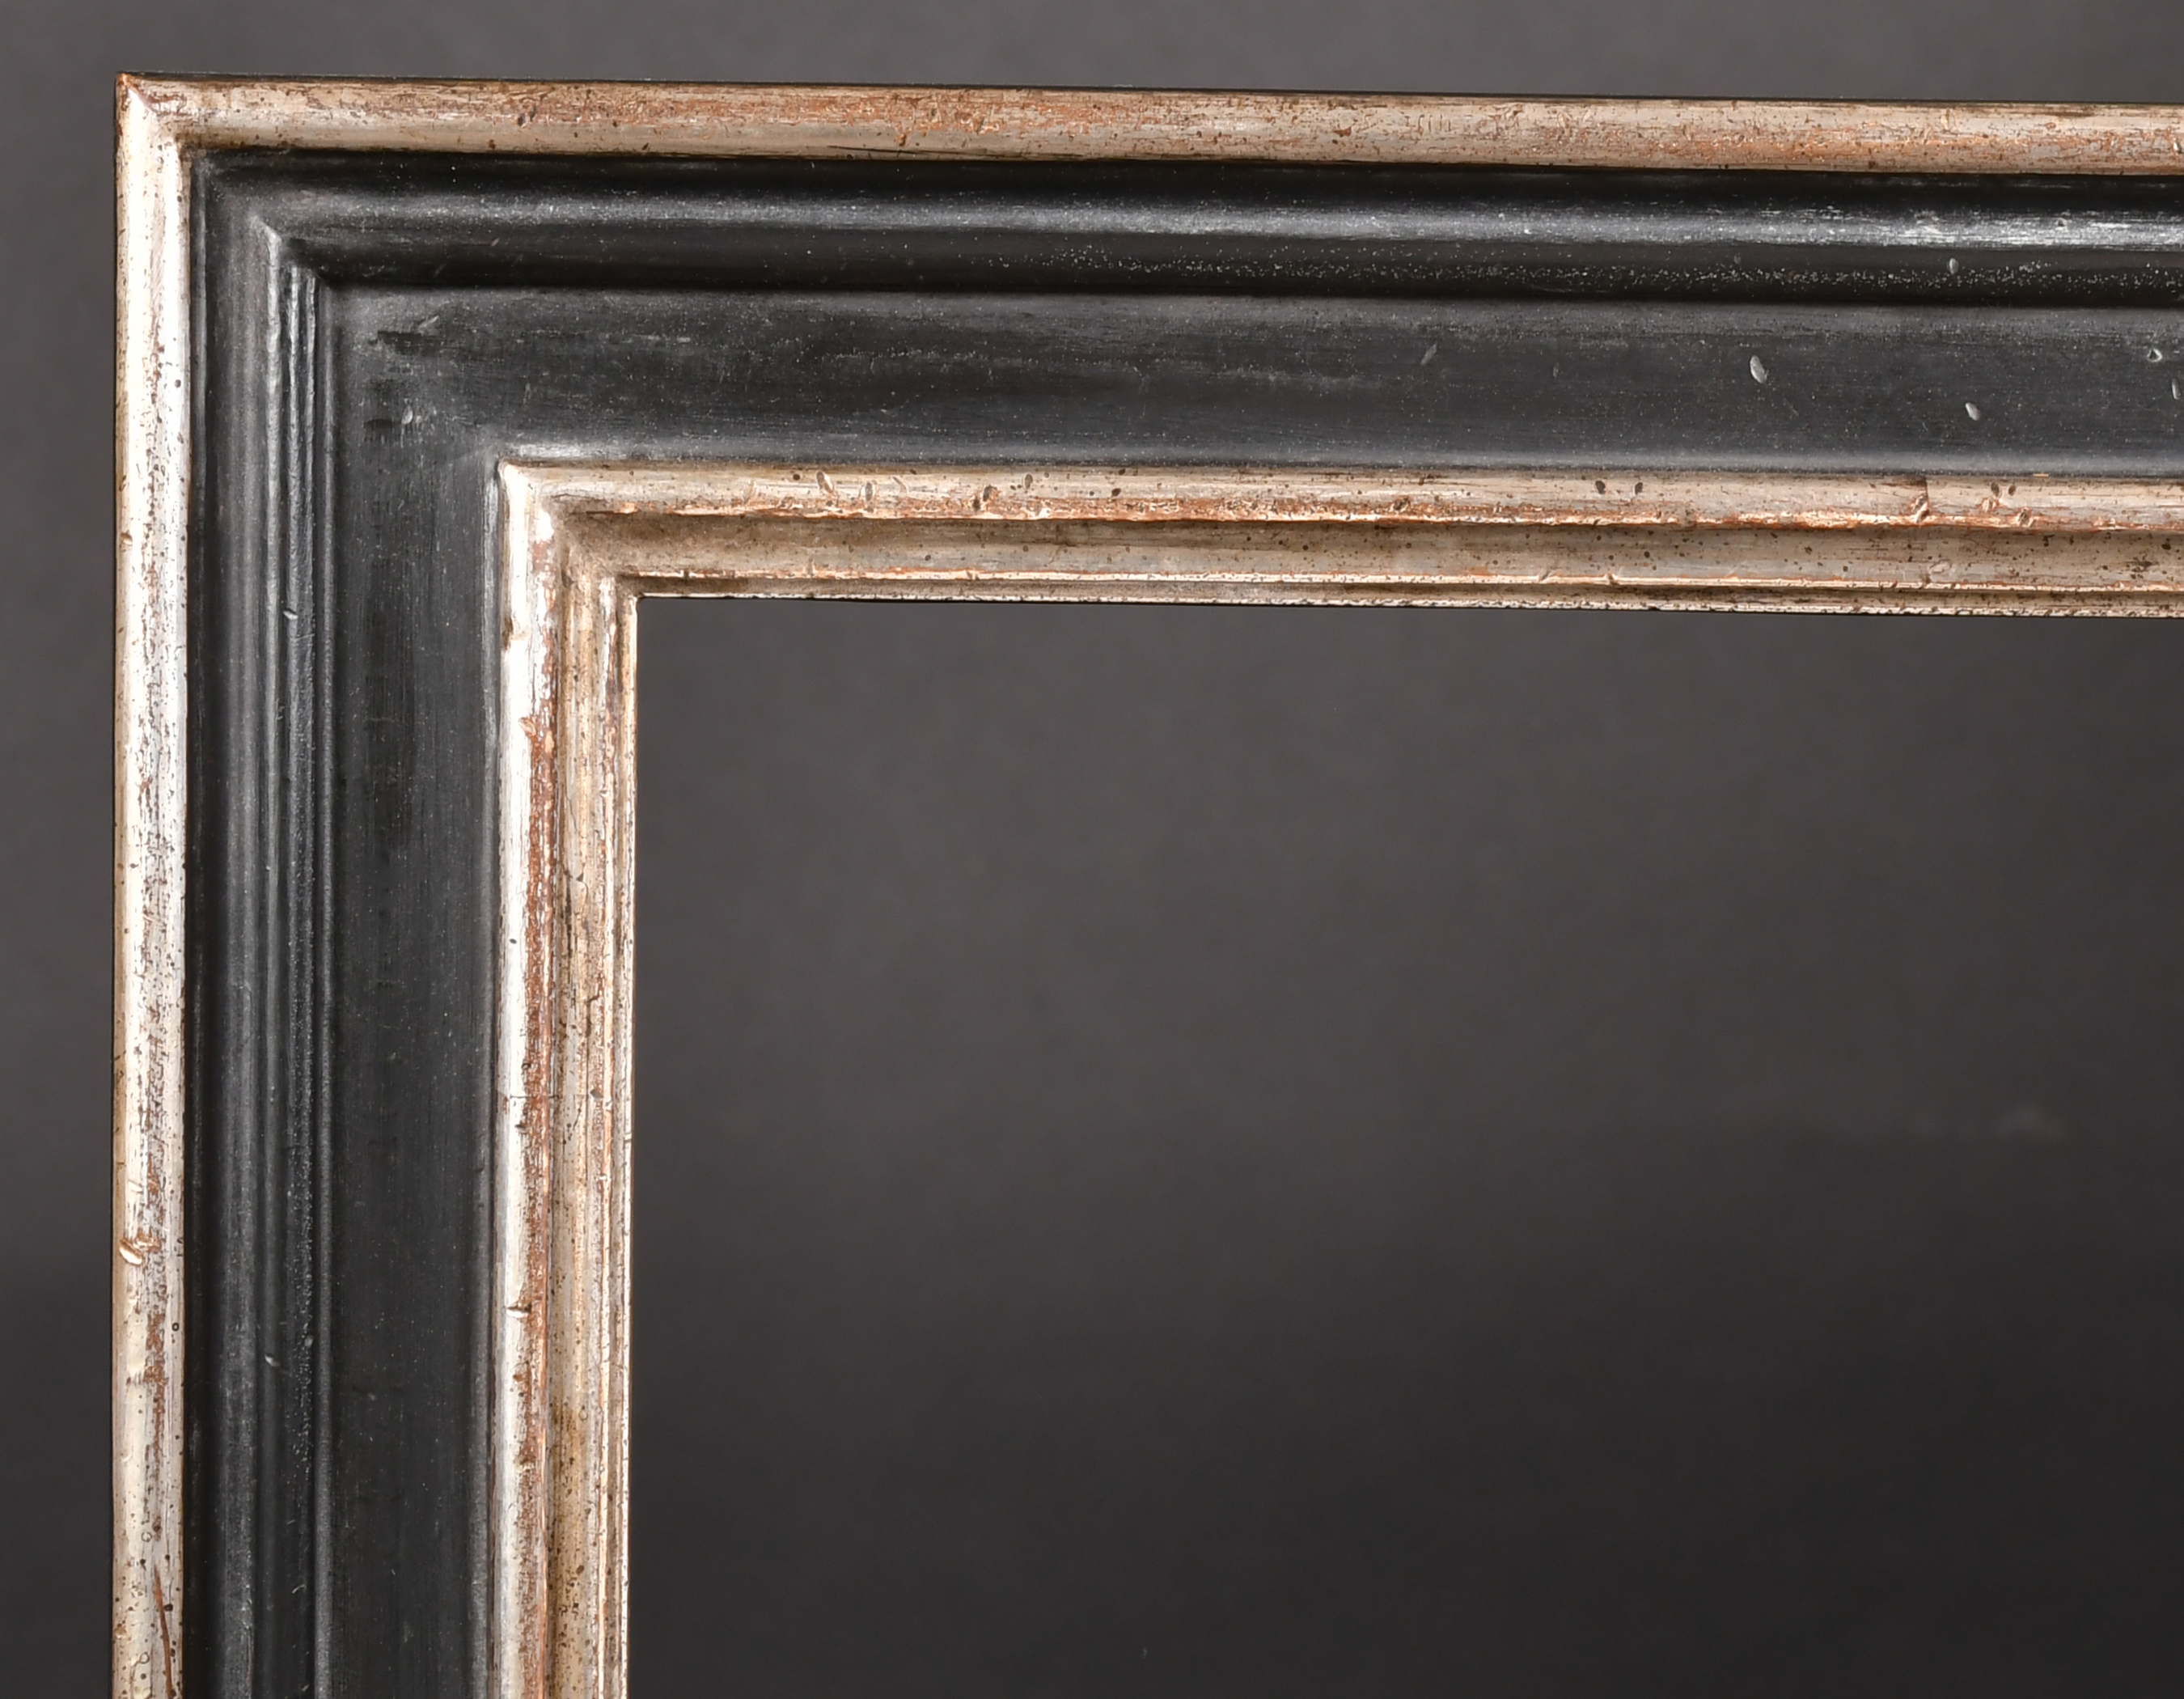 20th Century English School. A Black and Silver Composition Frame, rebate 29.75" x 24.75" (75.6 x